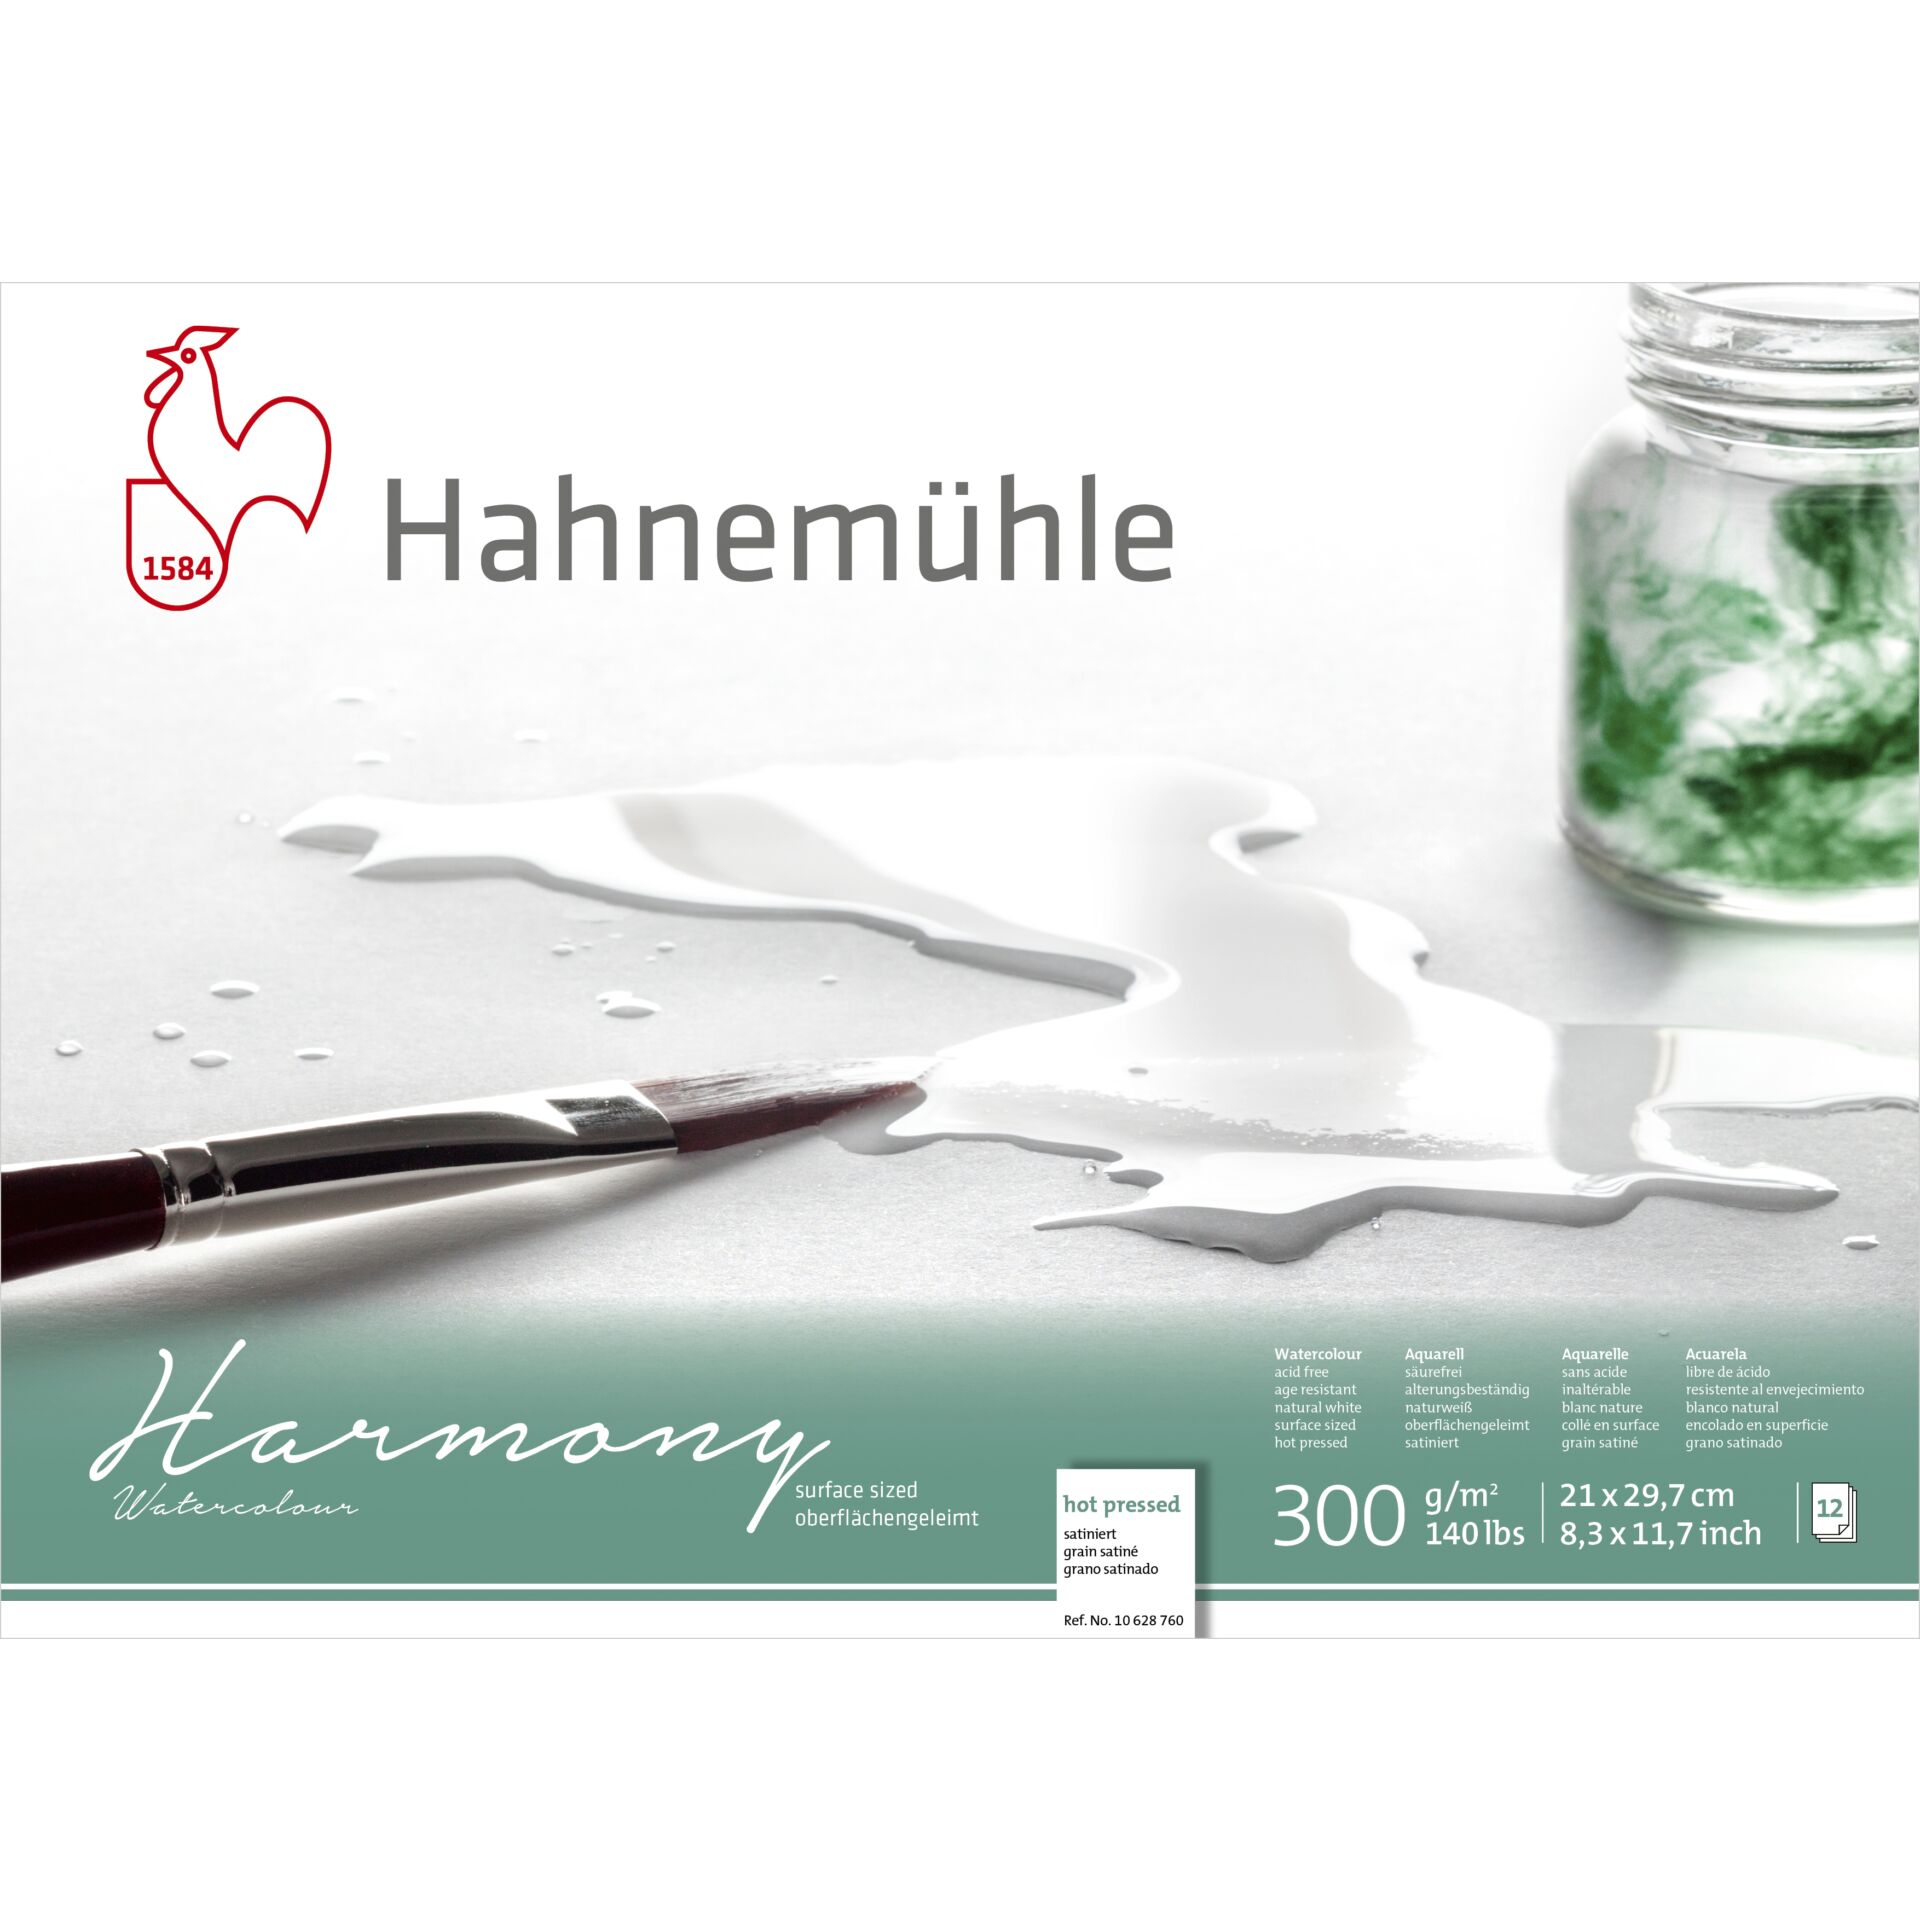 Hahnemühle Harmony Watercolour hot pressed  12 Sheets  300g